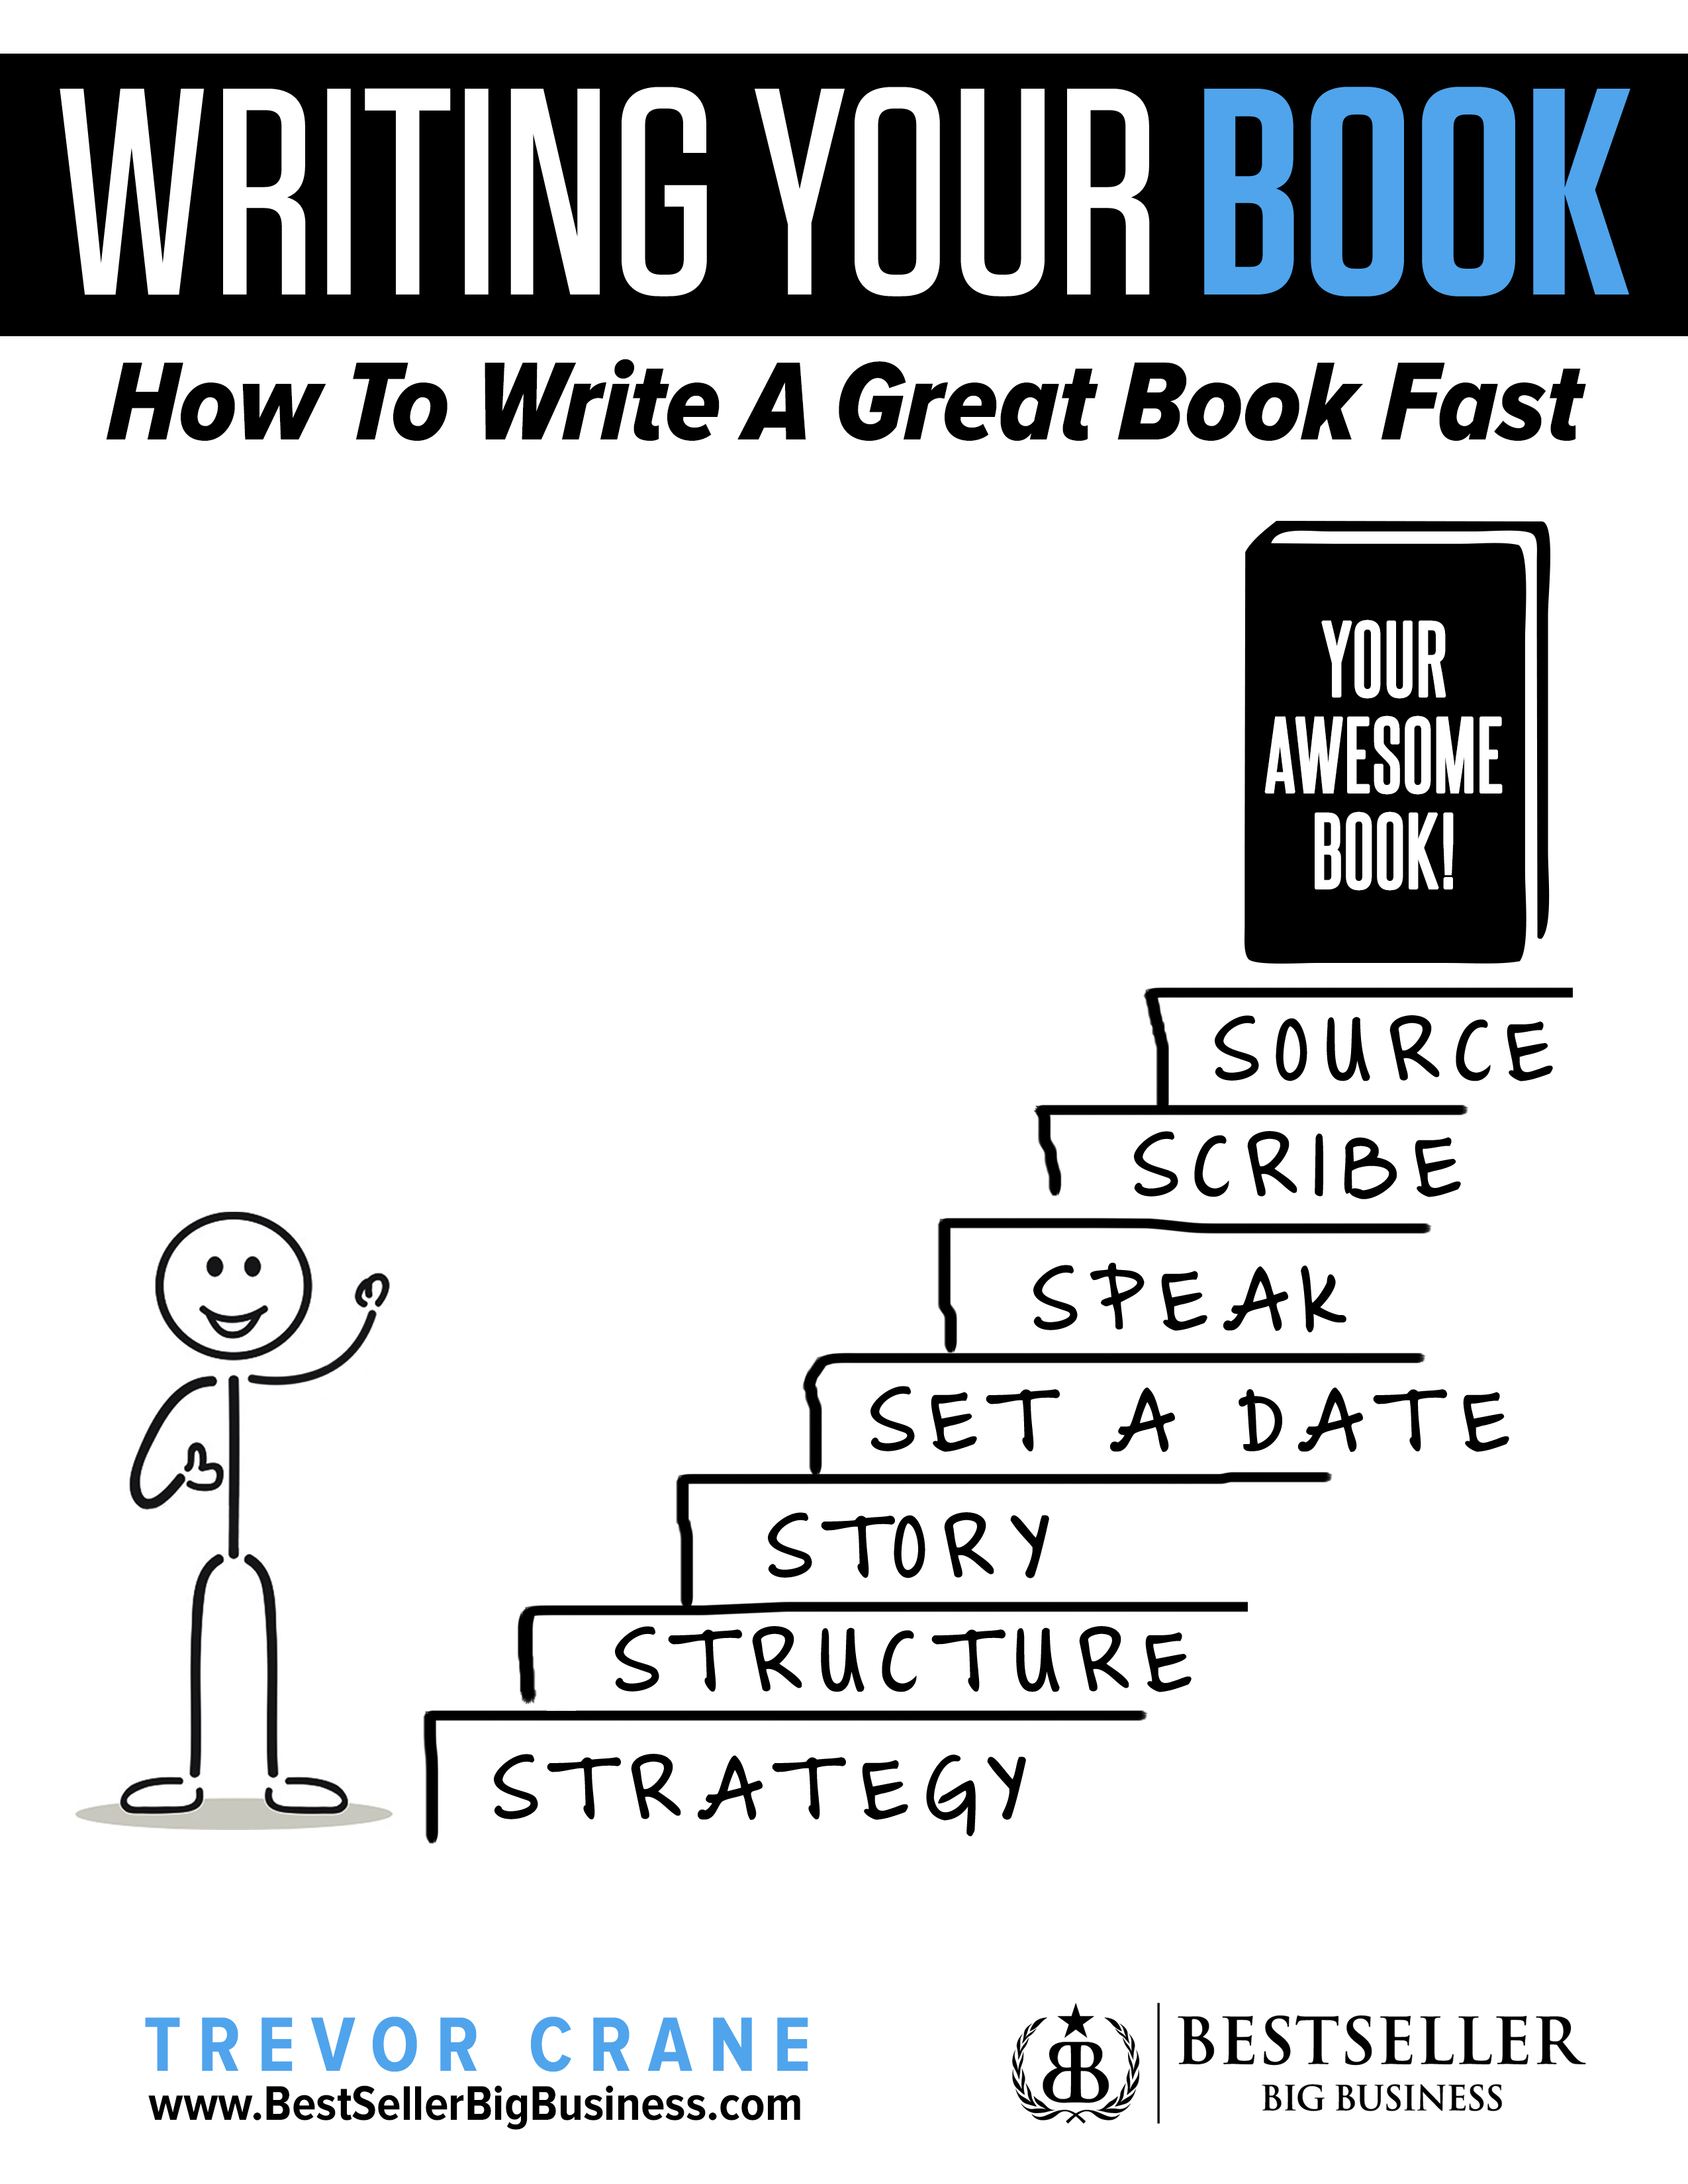 How To Write A Great Book Fast - Business Advisor  Increase